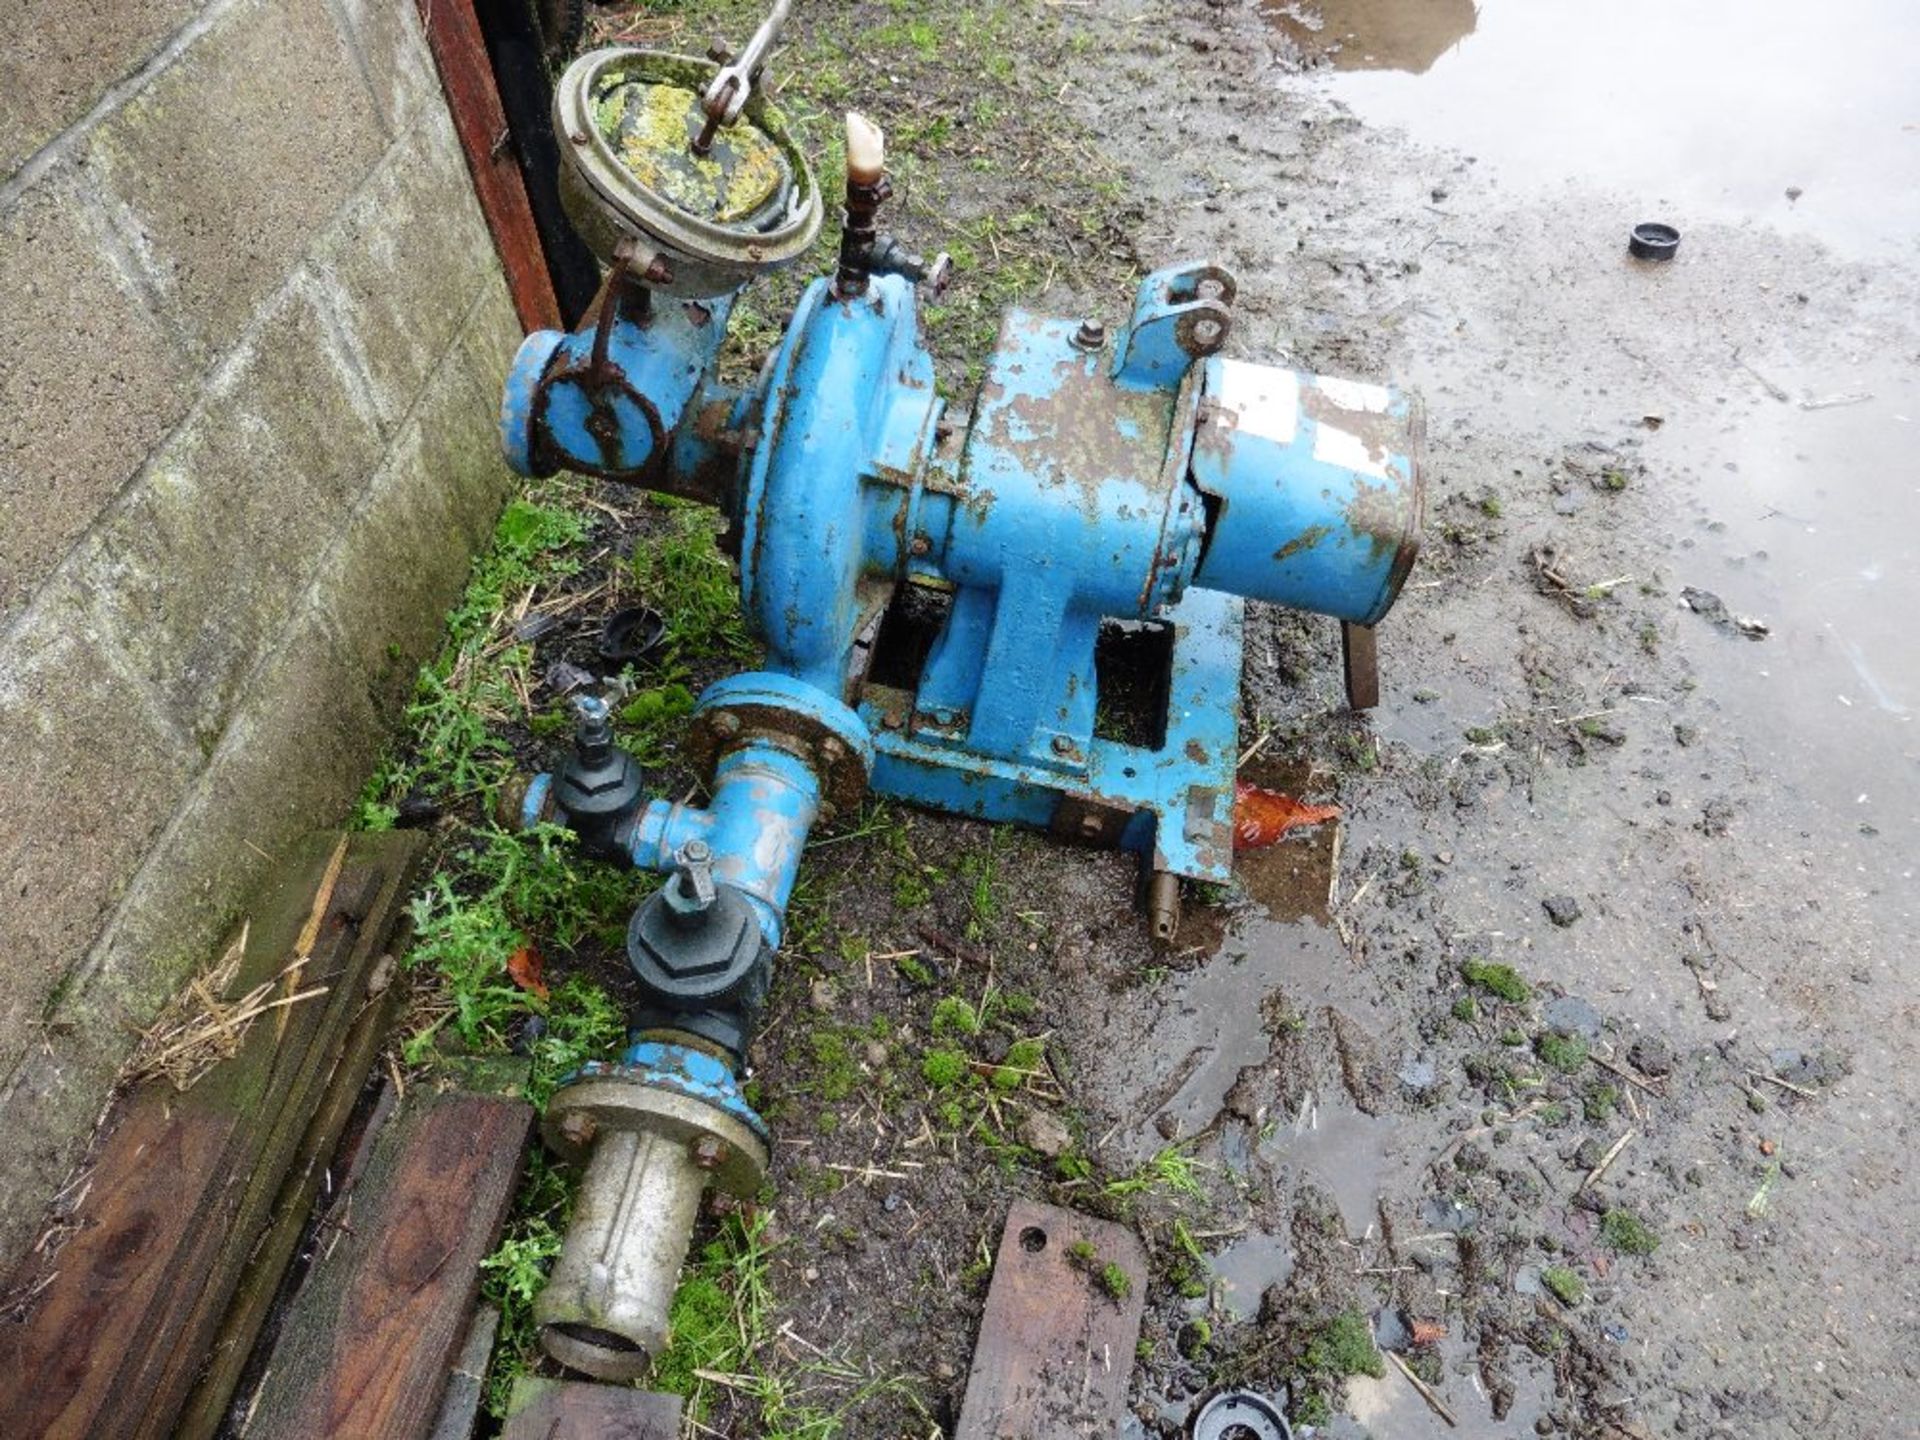 Farrow PTO driven irrigation pump. 3 inch outlet, 4 inch inlet. Shaft of pto missing. - Image 3 of 3